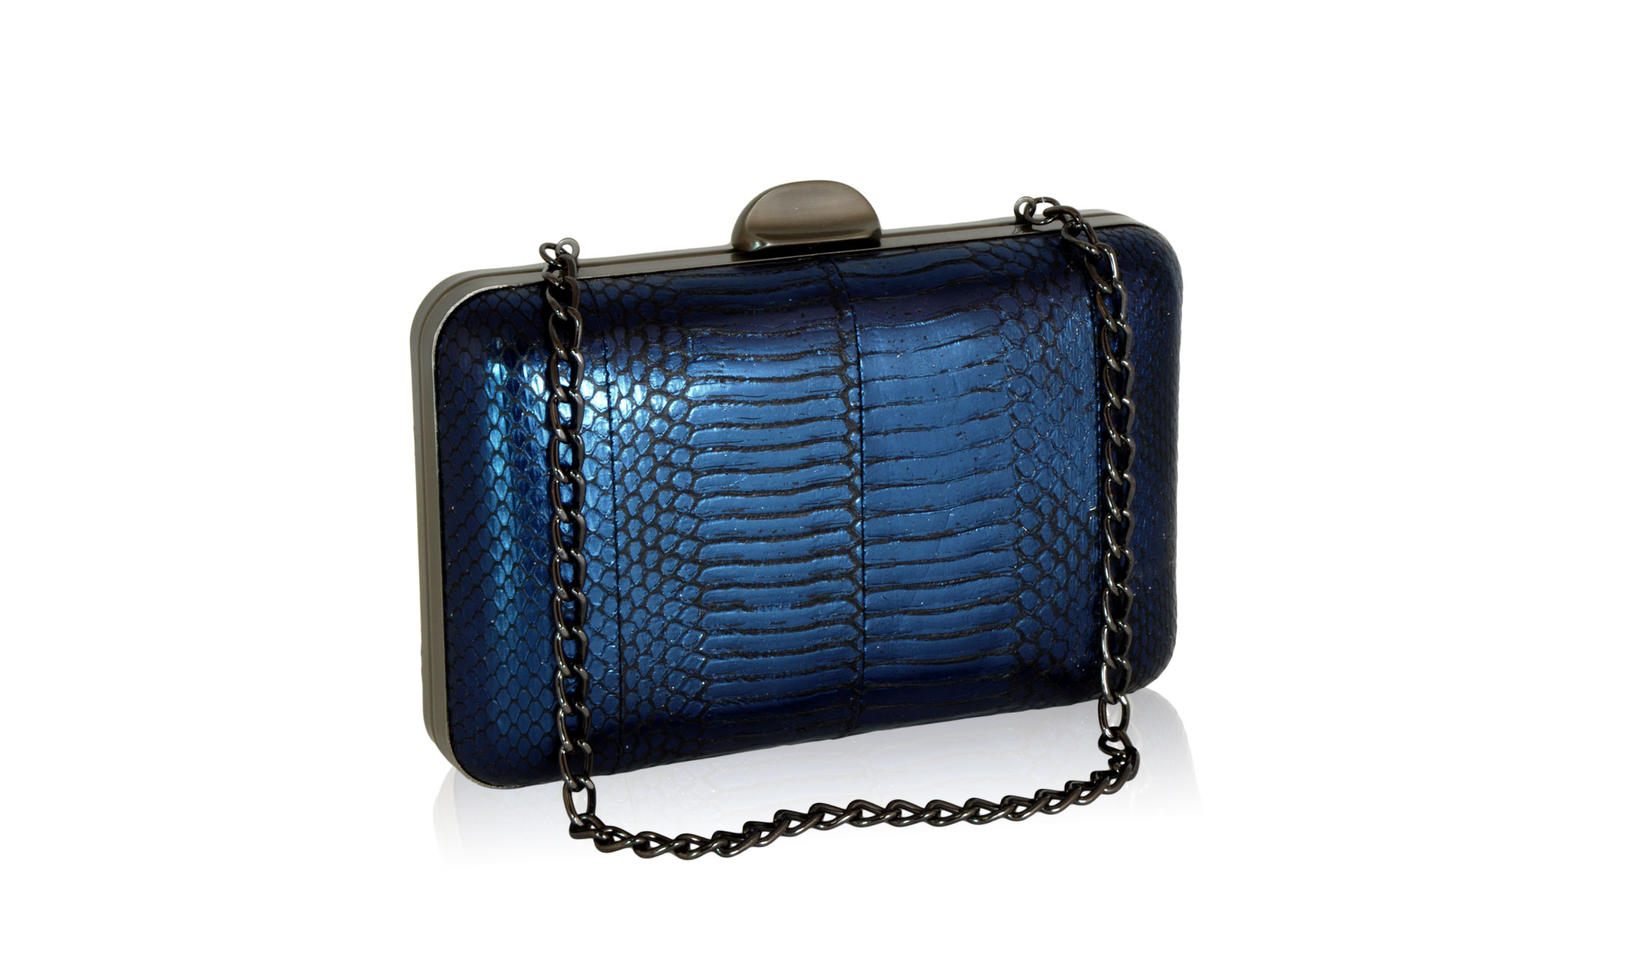 gaa-178-md-midnight-blue-snakeskin-clutch-bag-special-occasion-evening-bag